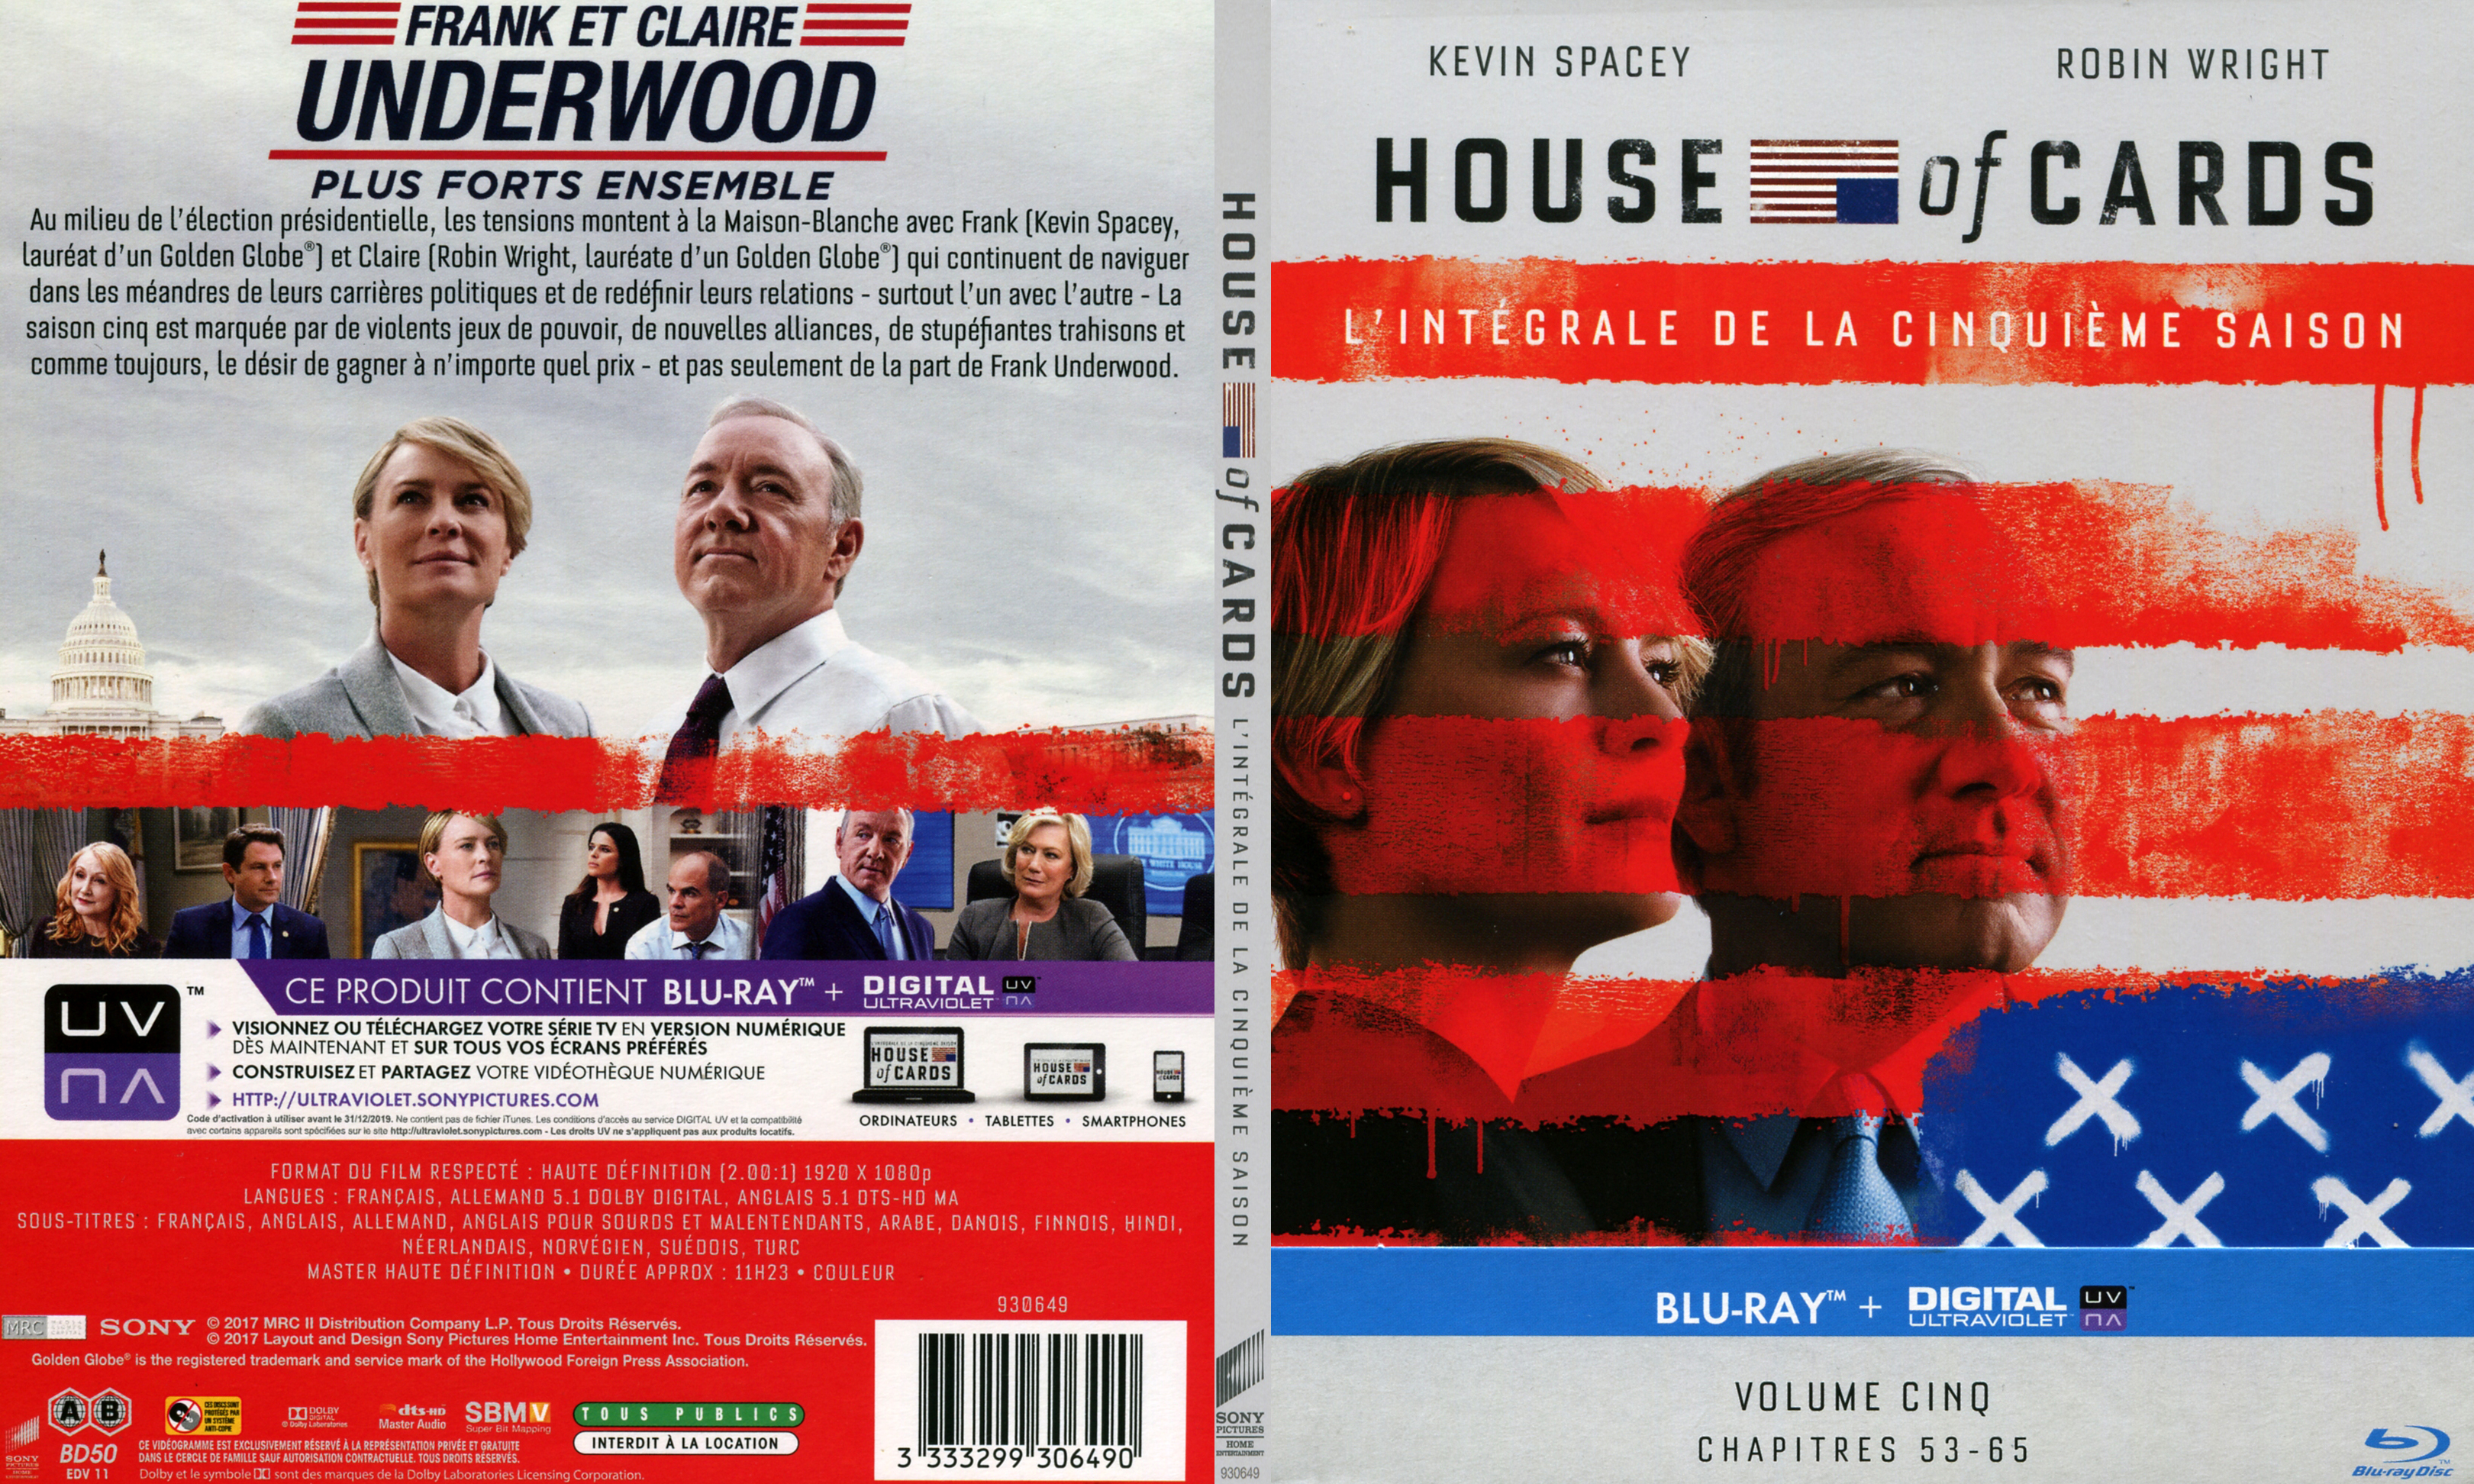 Jaquette DVD House Of Cards Saison 5 (BLU-RAY)